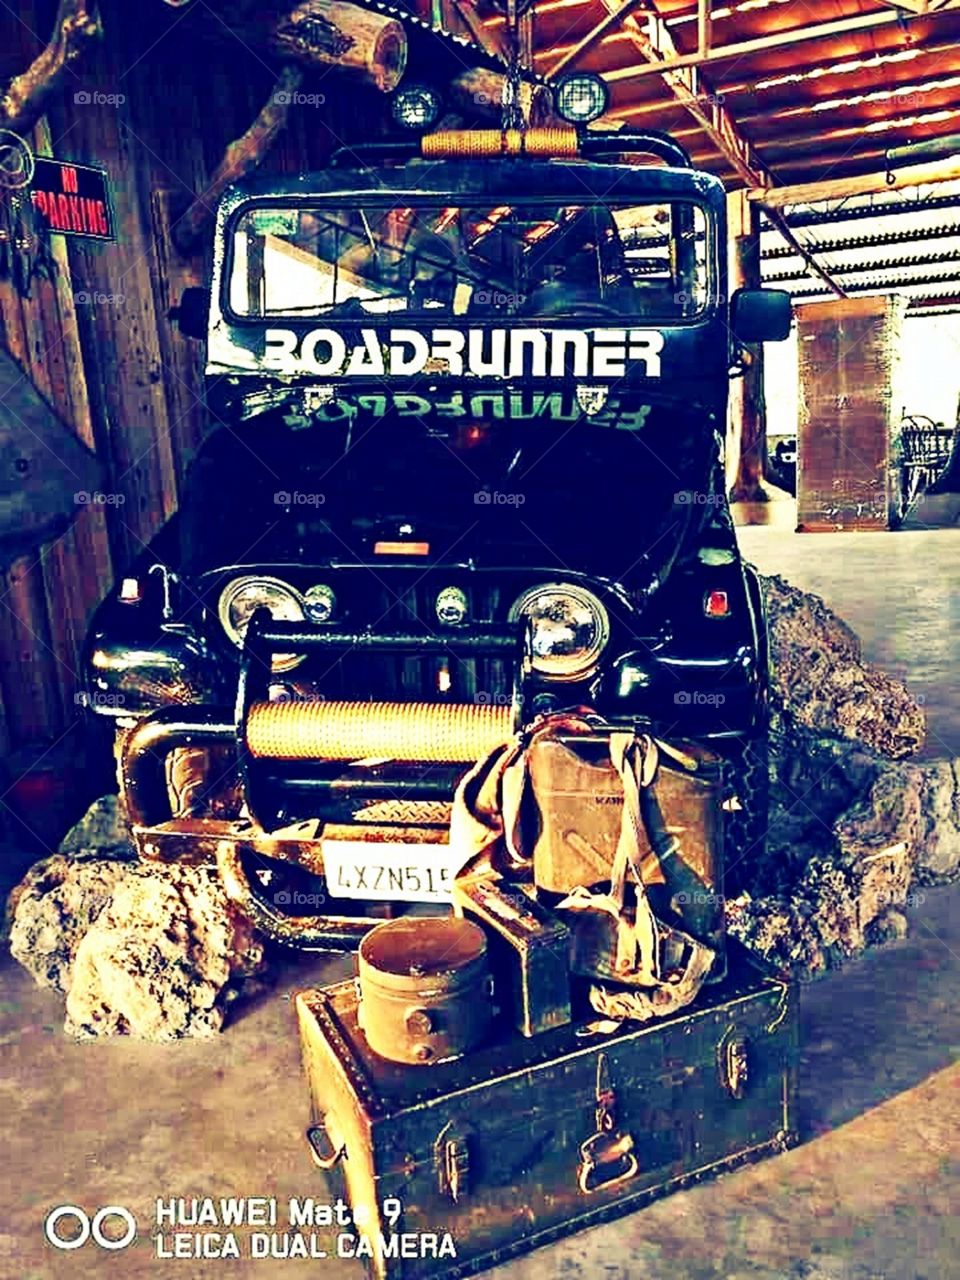 The Rough Road Vehicle!